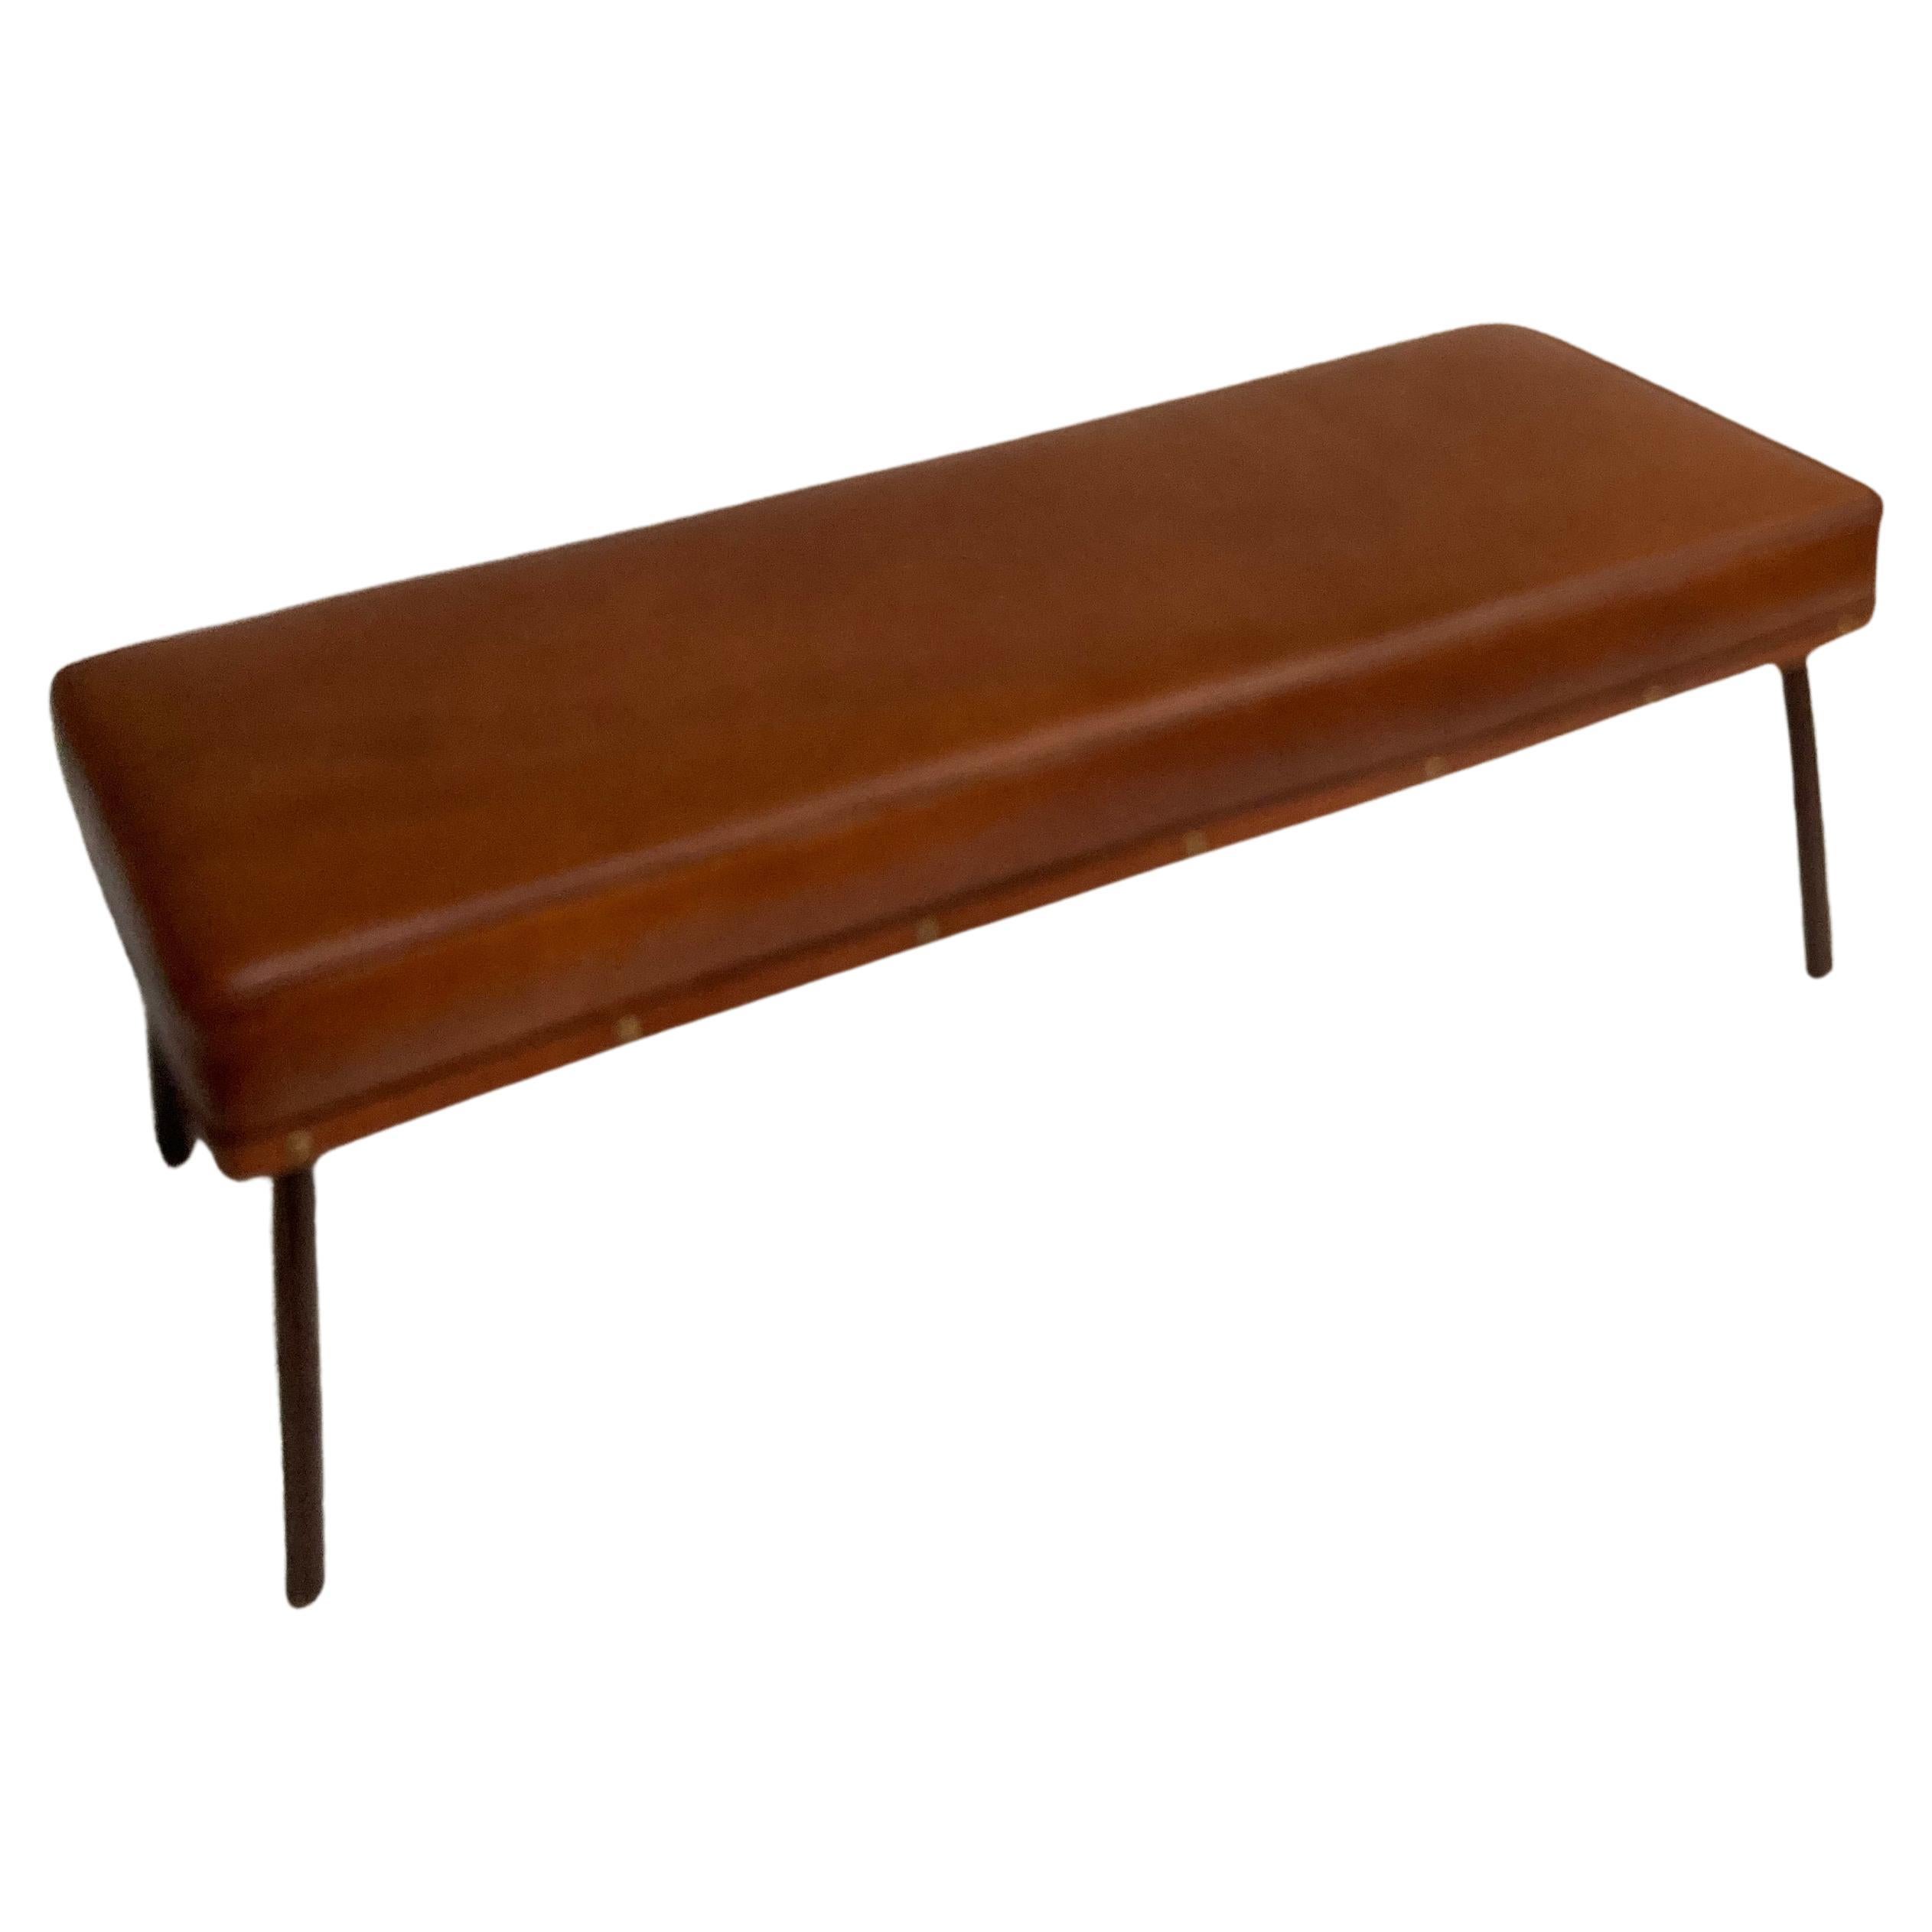 1950's Stitched Leather Bench by Jacques Adnet For Sale